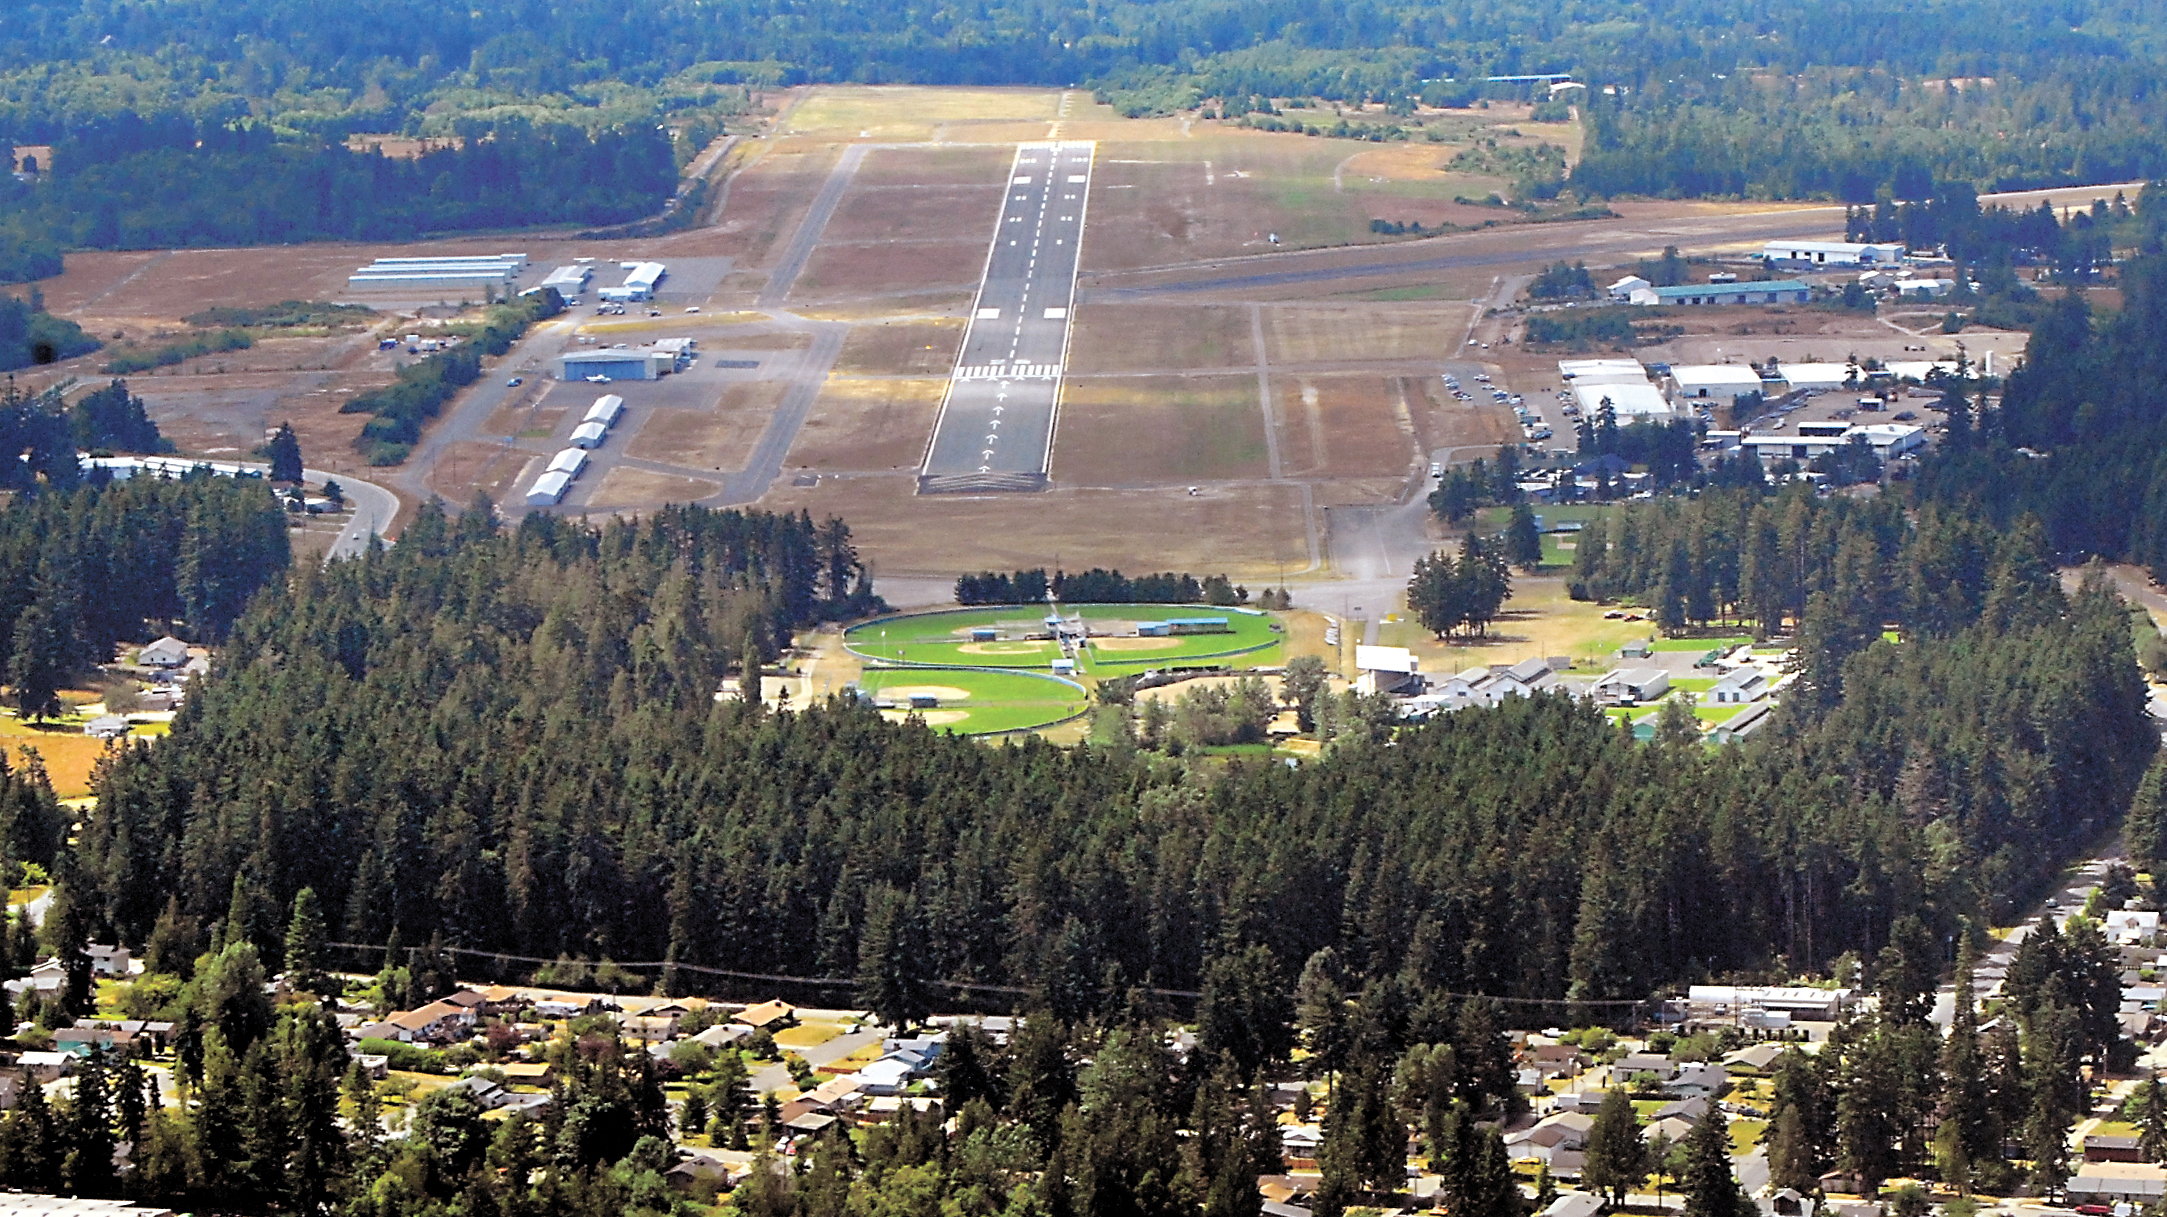 Trees in Lincoln Park in Port Angeles stand in the approach to Runway 26 at William R. Fairchild International Airport on July 29